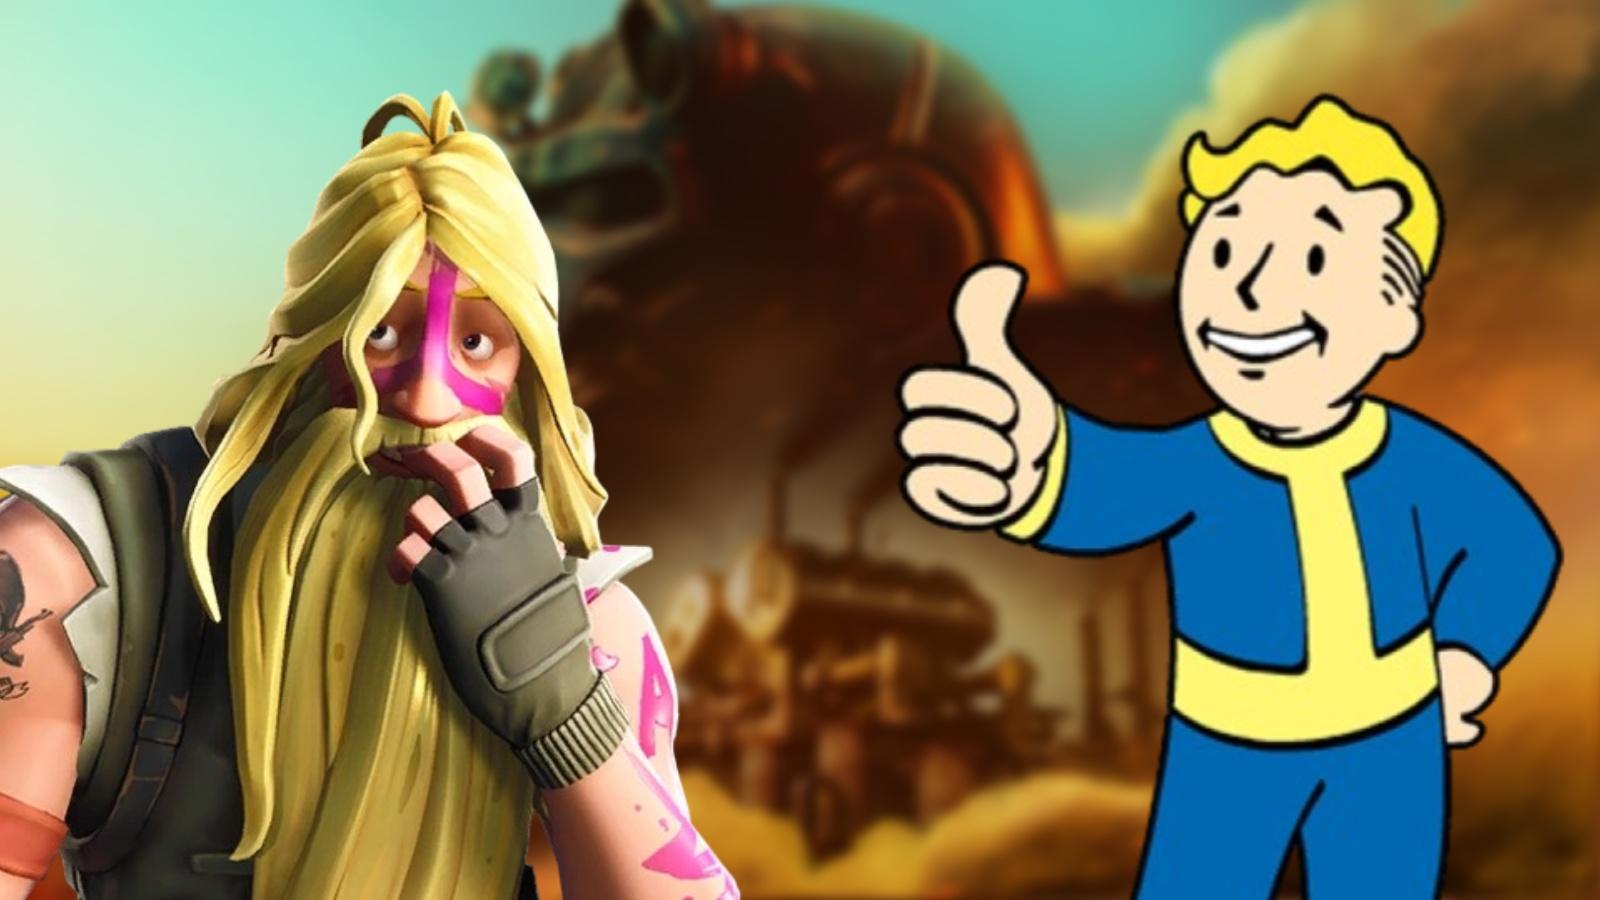 A screenshot featuring Jonesy from Fortnite and Vault Boy from Fallout.